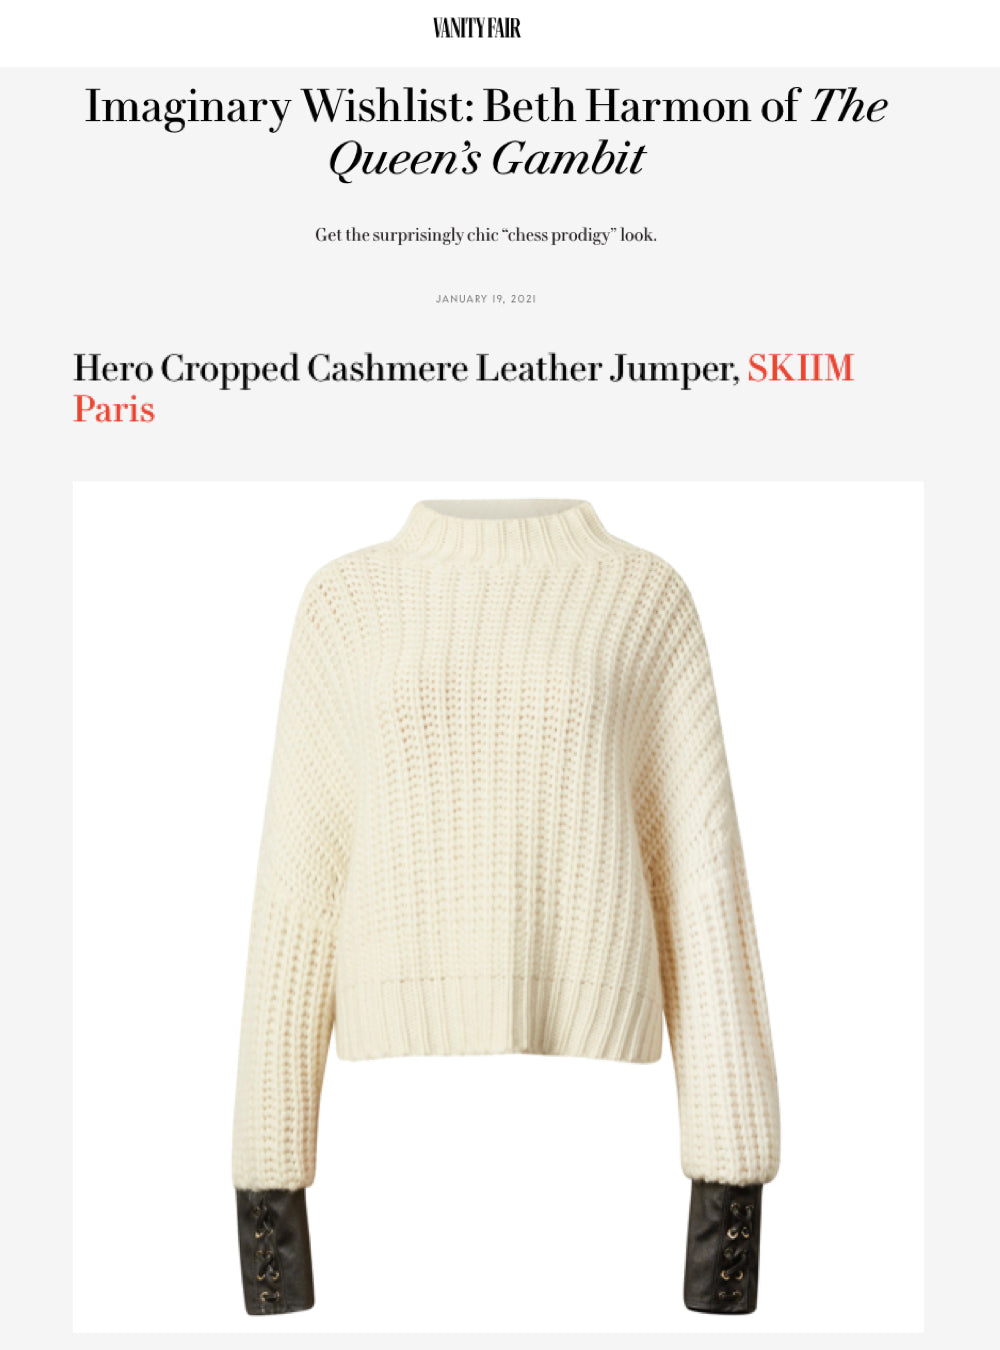 OUR HERO CASHMERE JUMPER FEATURED IN VANITY FAIR'S: "Imaginary Wishlist" Series